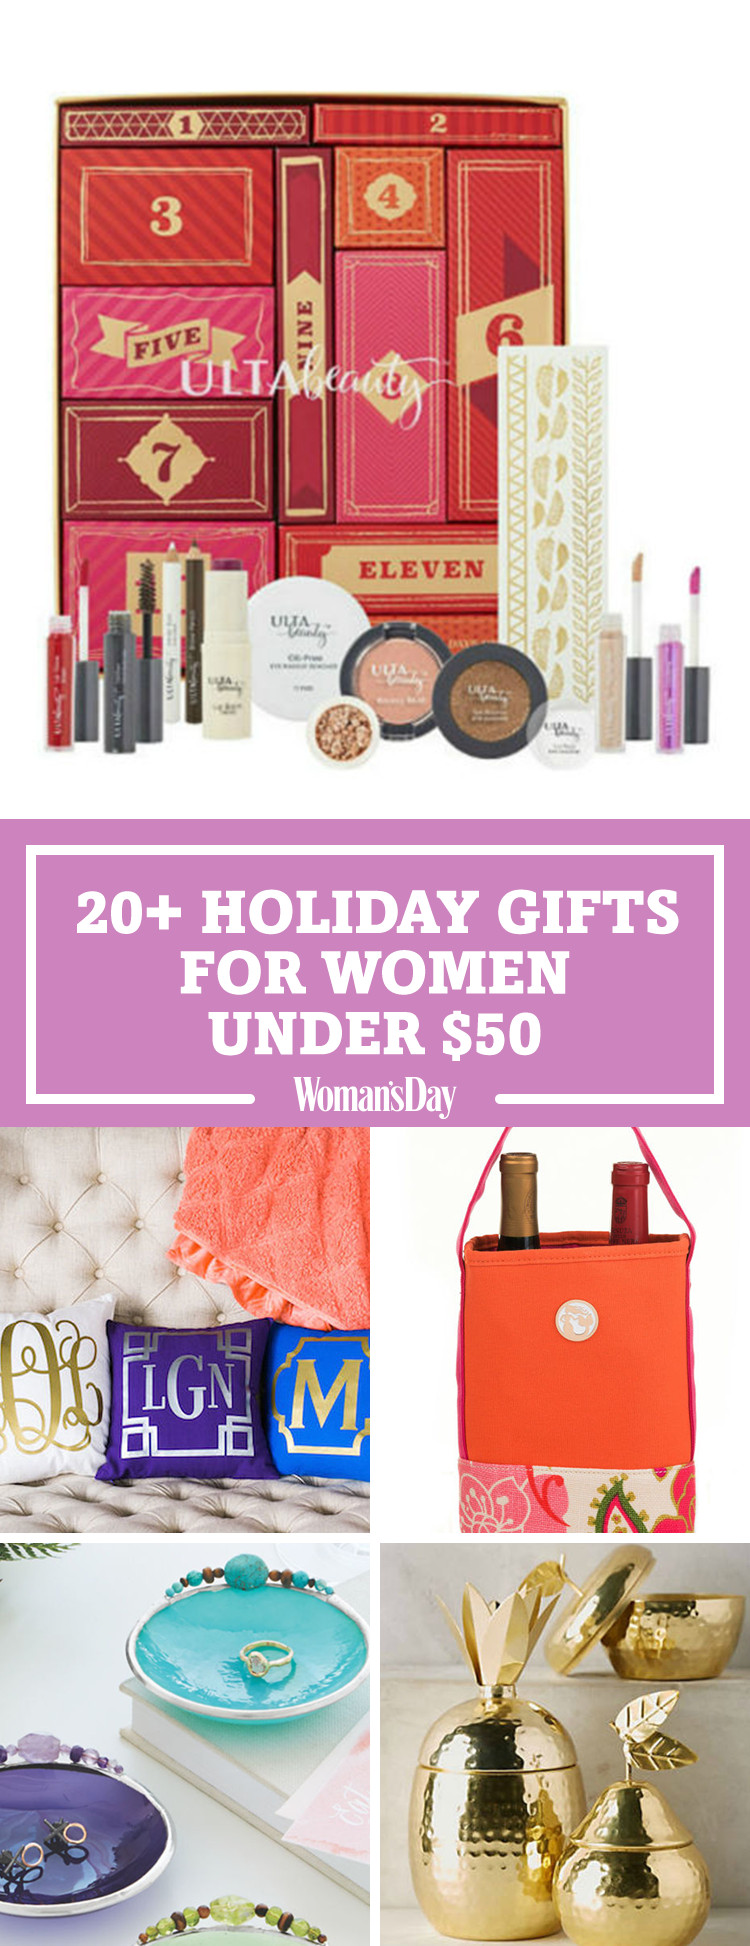 Holiday Gift Ideas For Woman
 36 Best Christmas Gifts for Women Under $50 Unique